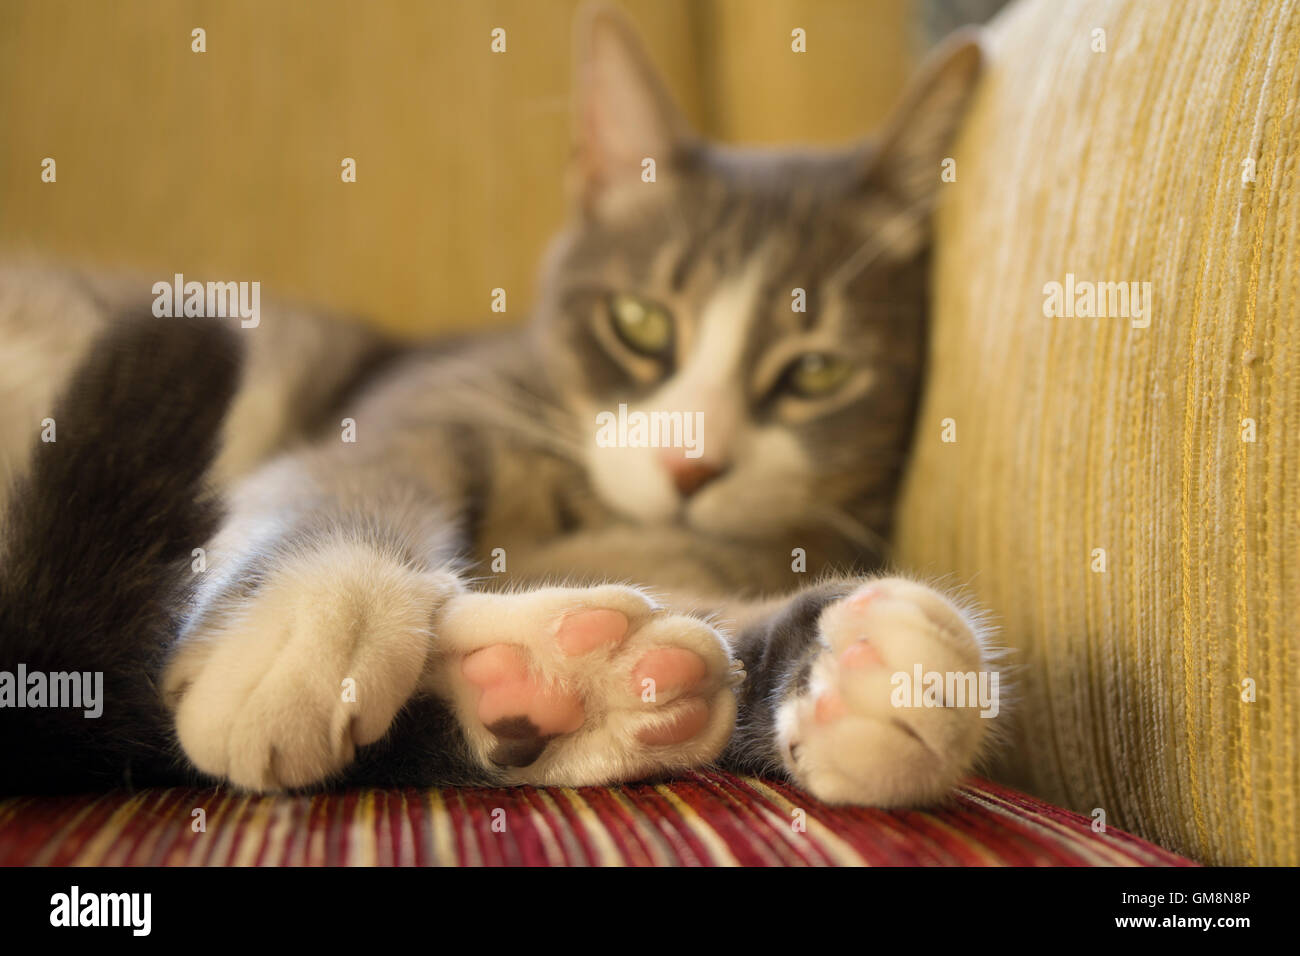 cat picture with paws in focus Stock Photo